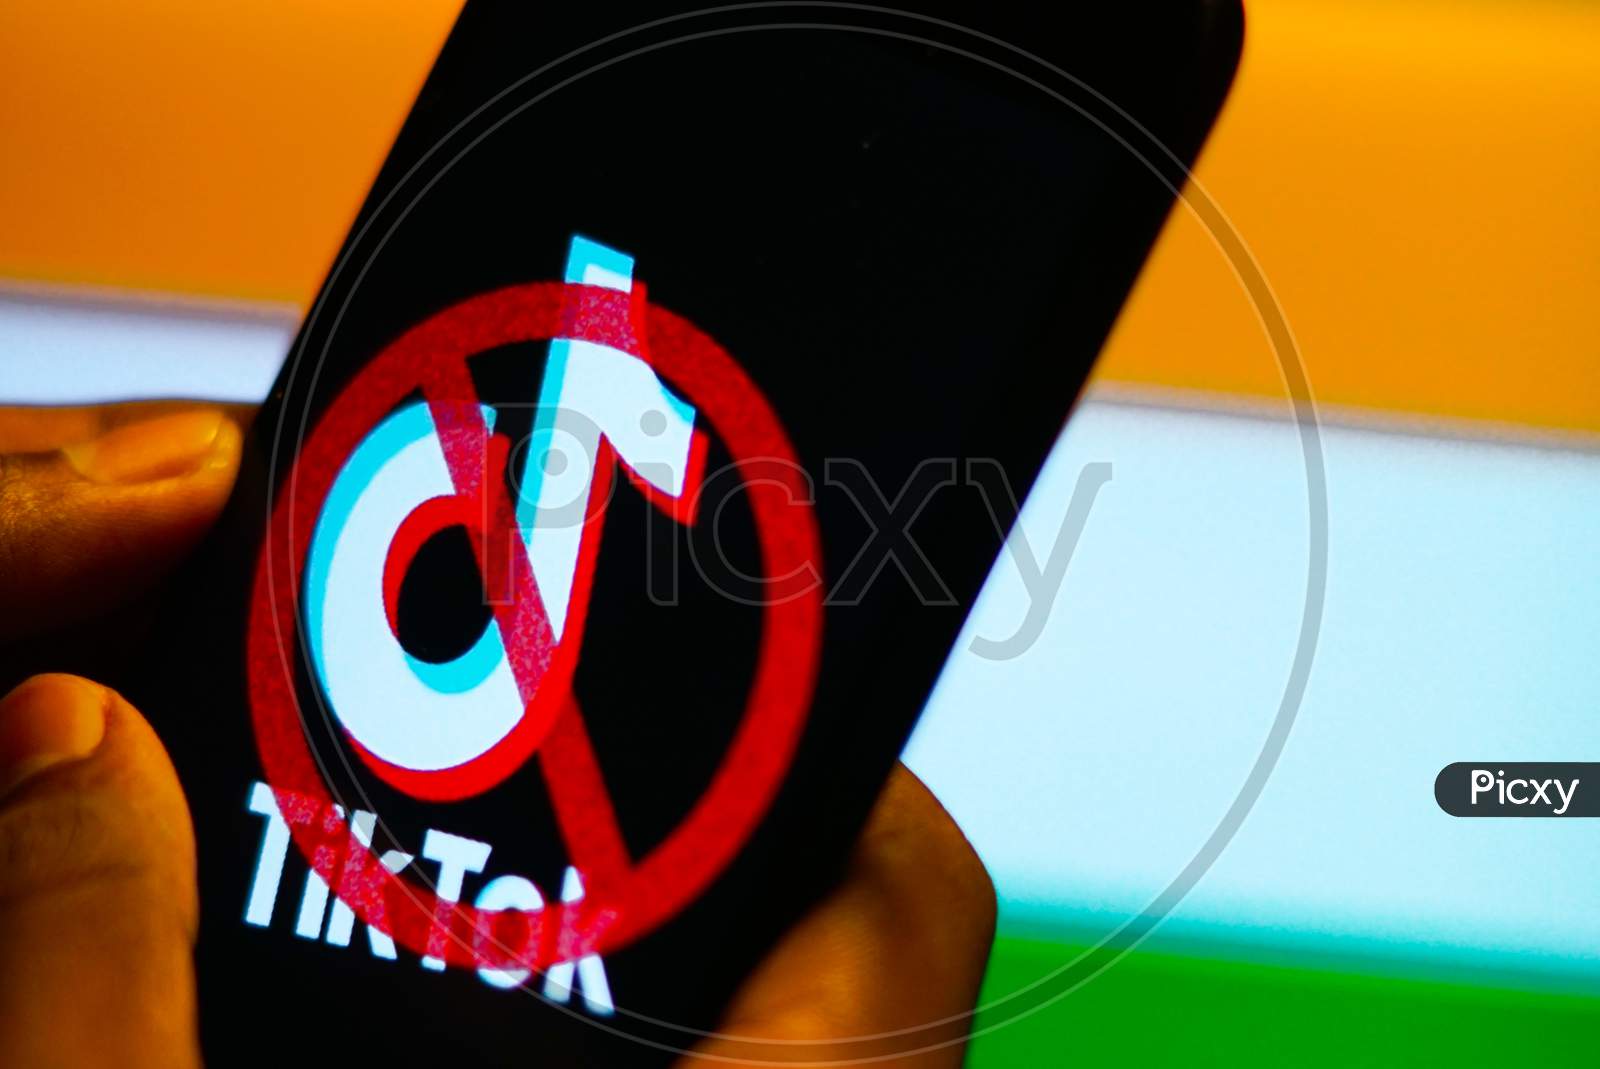 Banned Tiktok Application Logo On A Mobile Screen with Indian Flag in the background